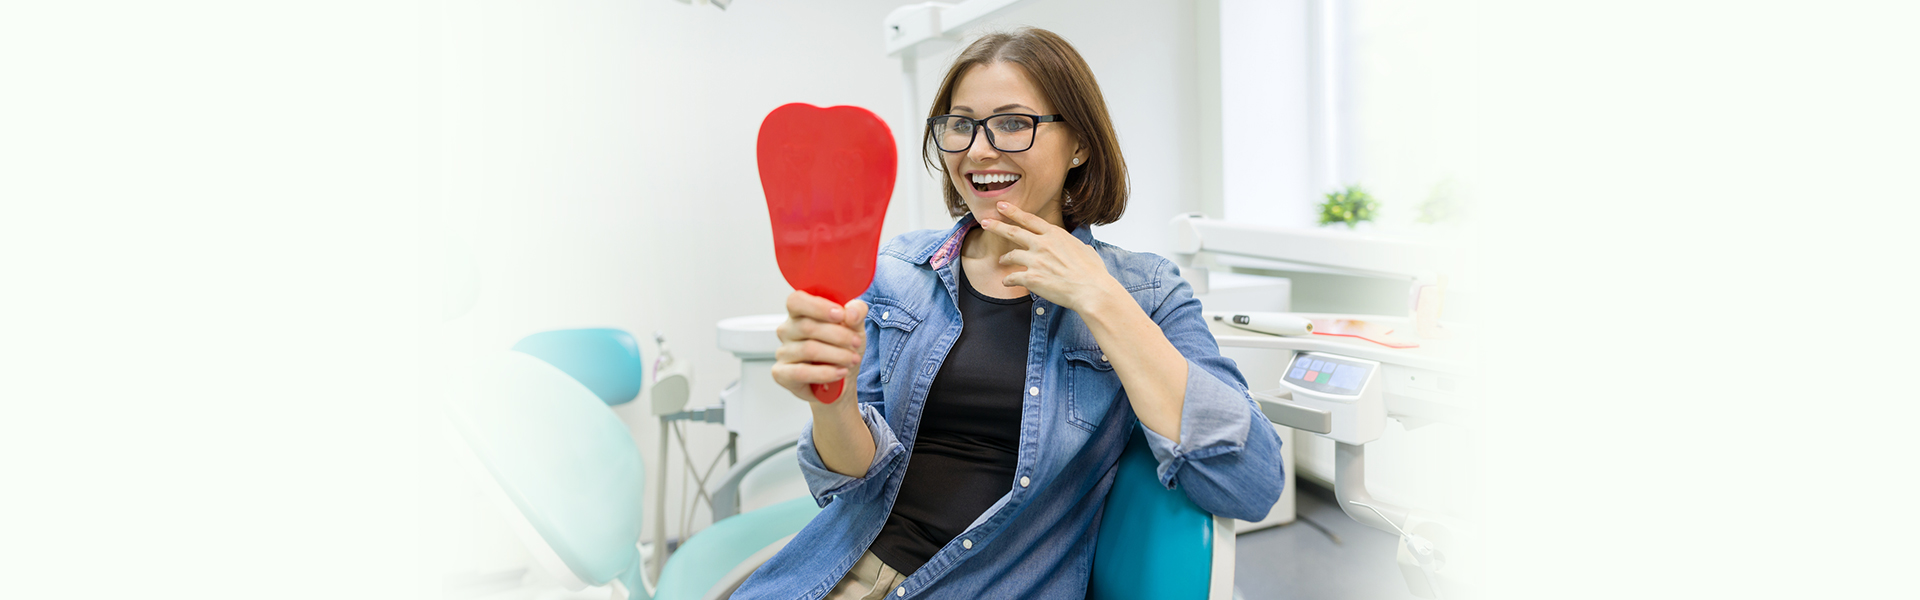 One-Stop Dentistry Provides Peace of Mind for Complete Dental Care